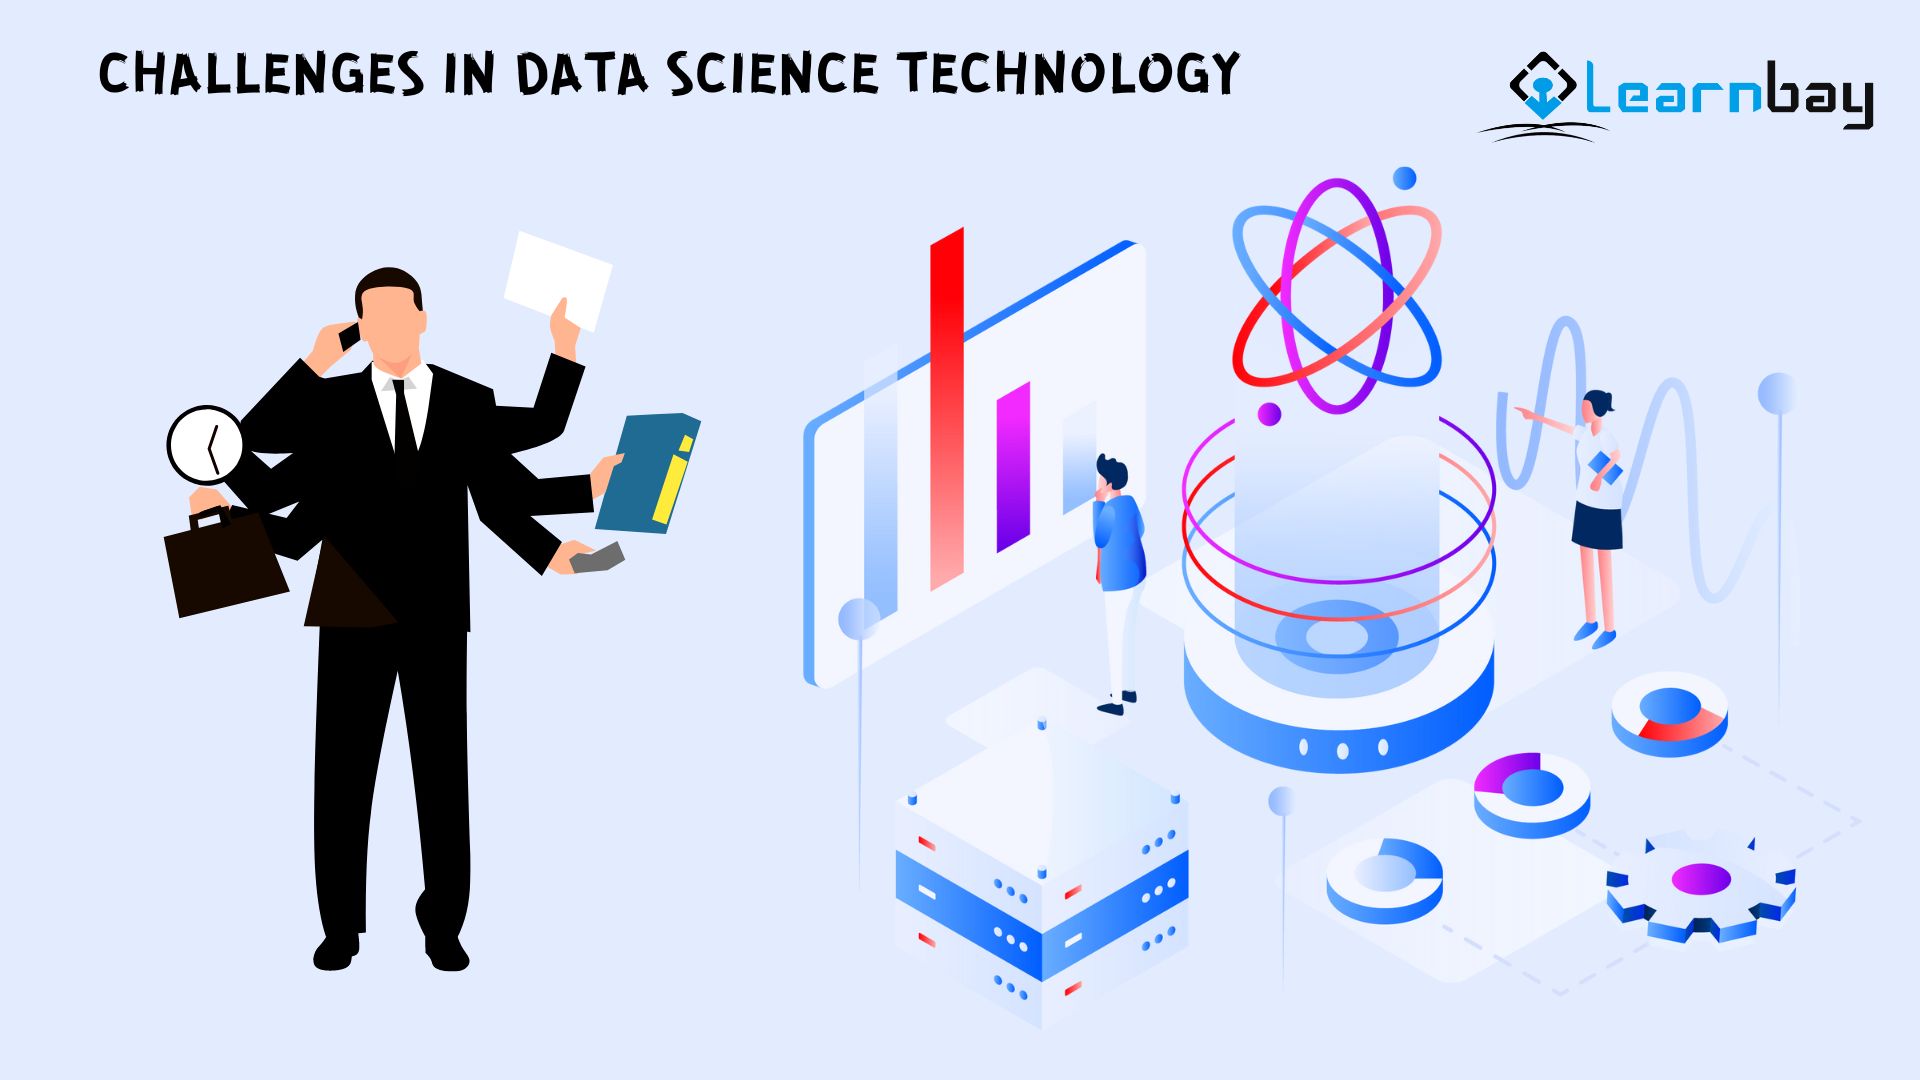 CHALLENGES IN DATA SCIENCE TECHNOLOGY Dlearnbay

+.
3
A

NA =

-

7

>